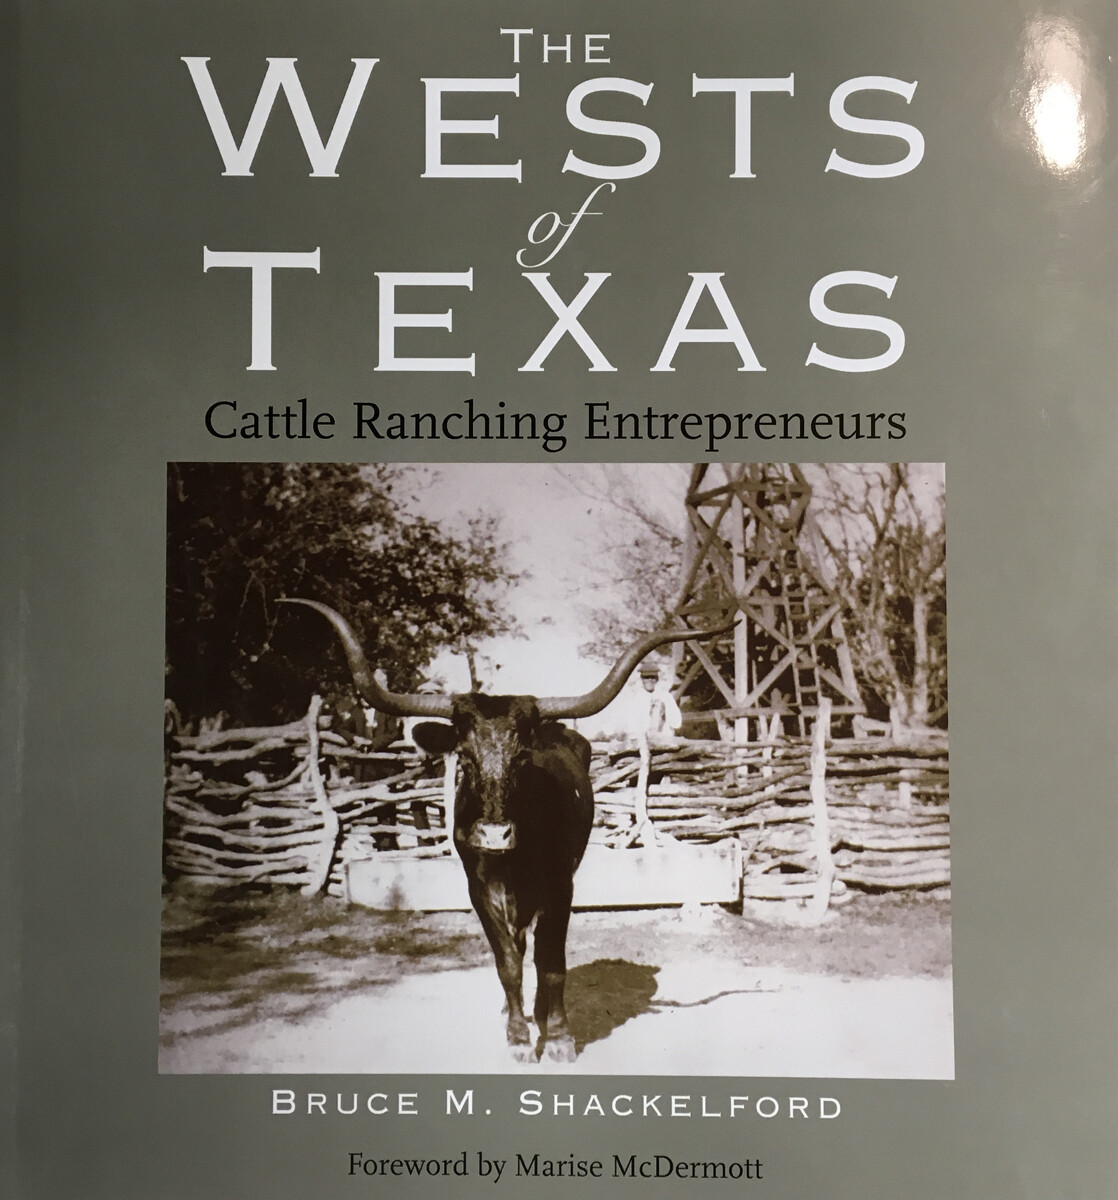 The Wests of Texas